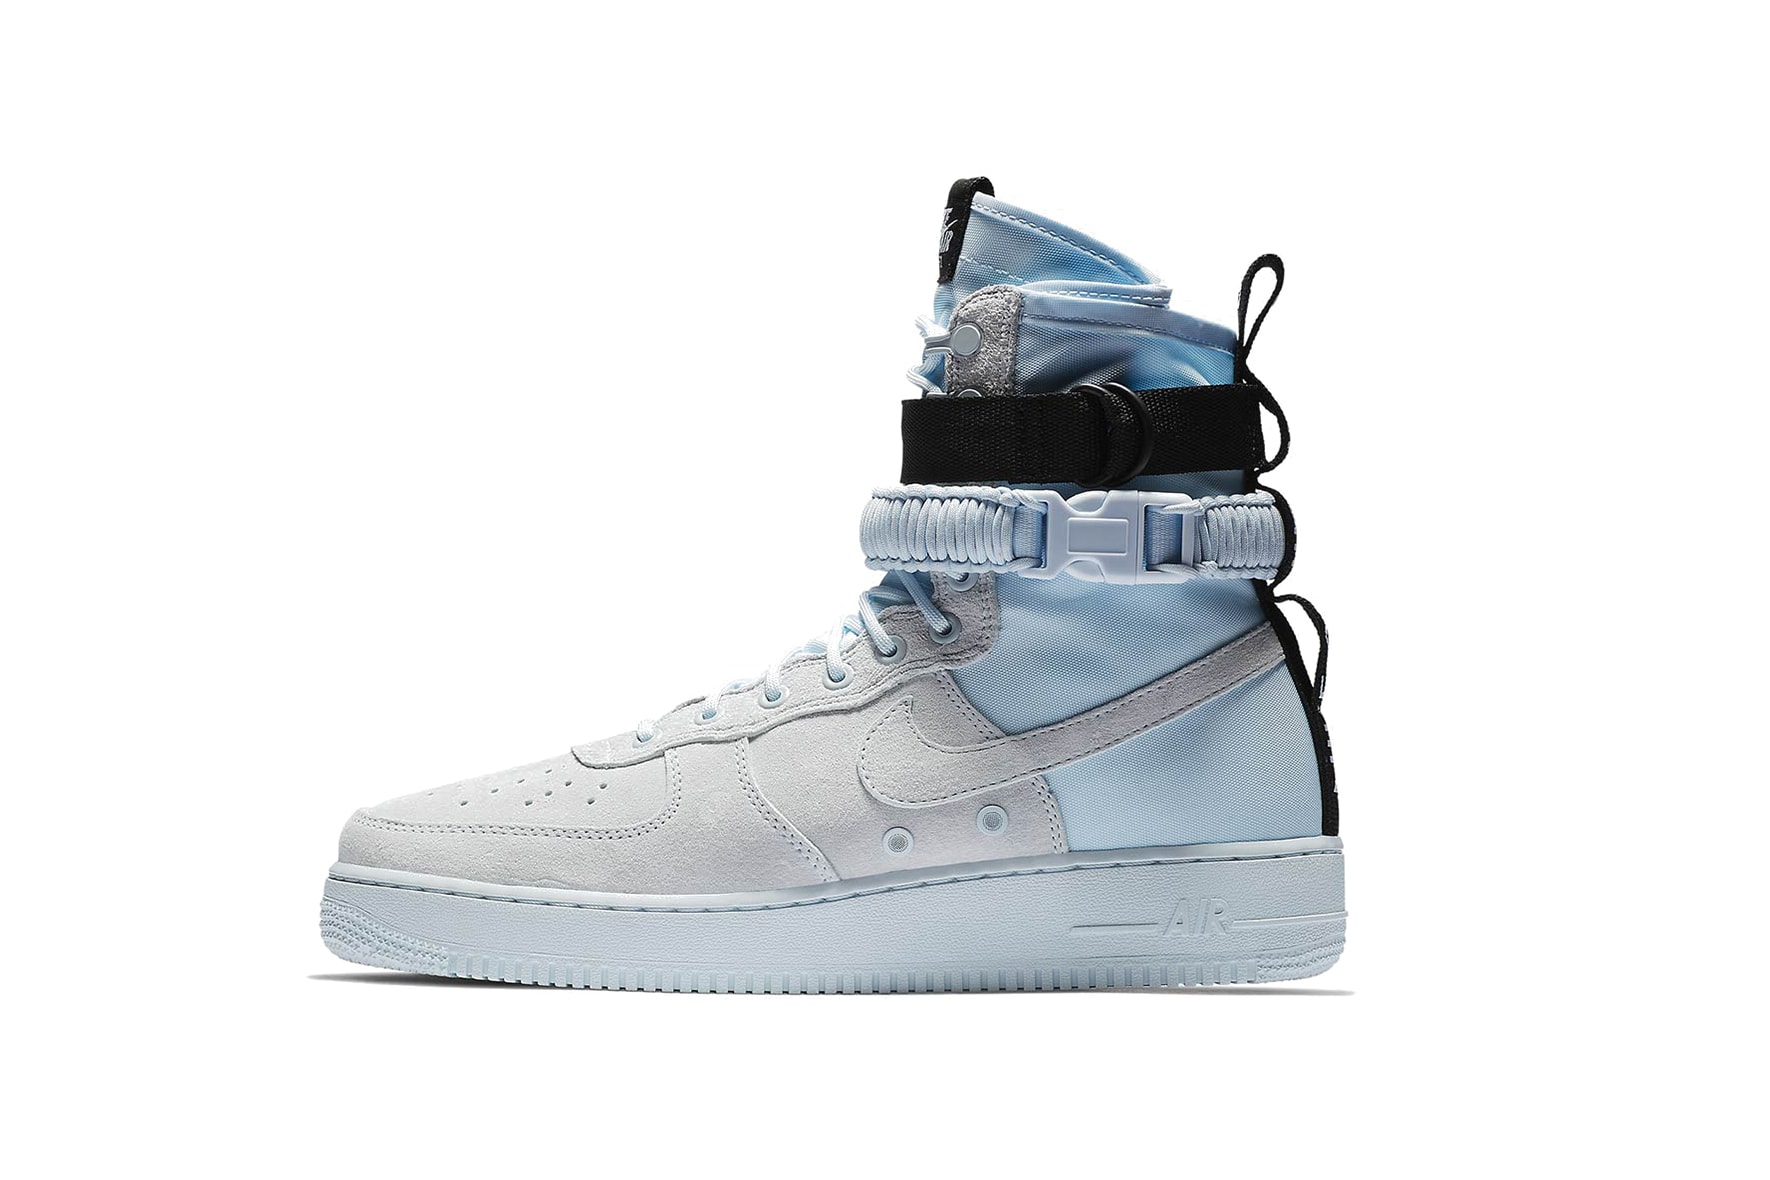 Nike SF Air Force 1 Releases 